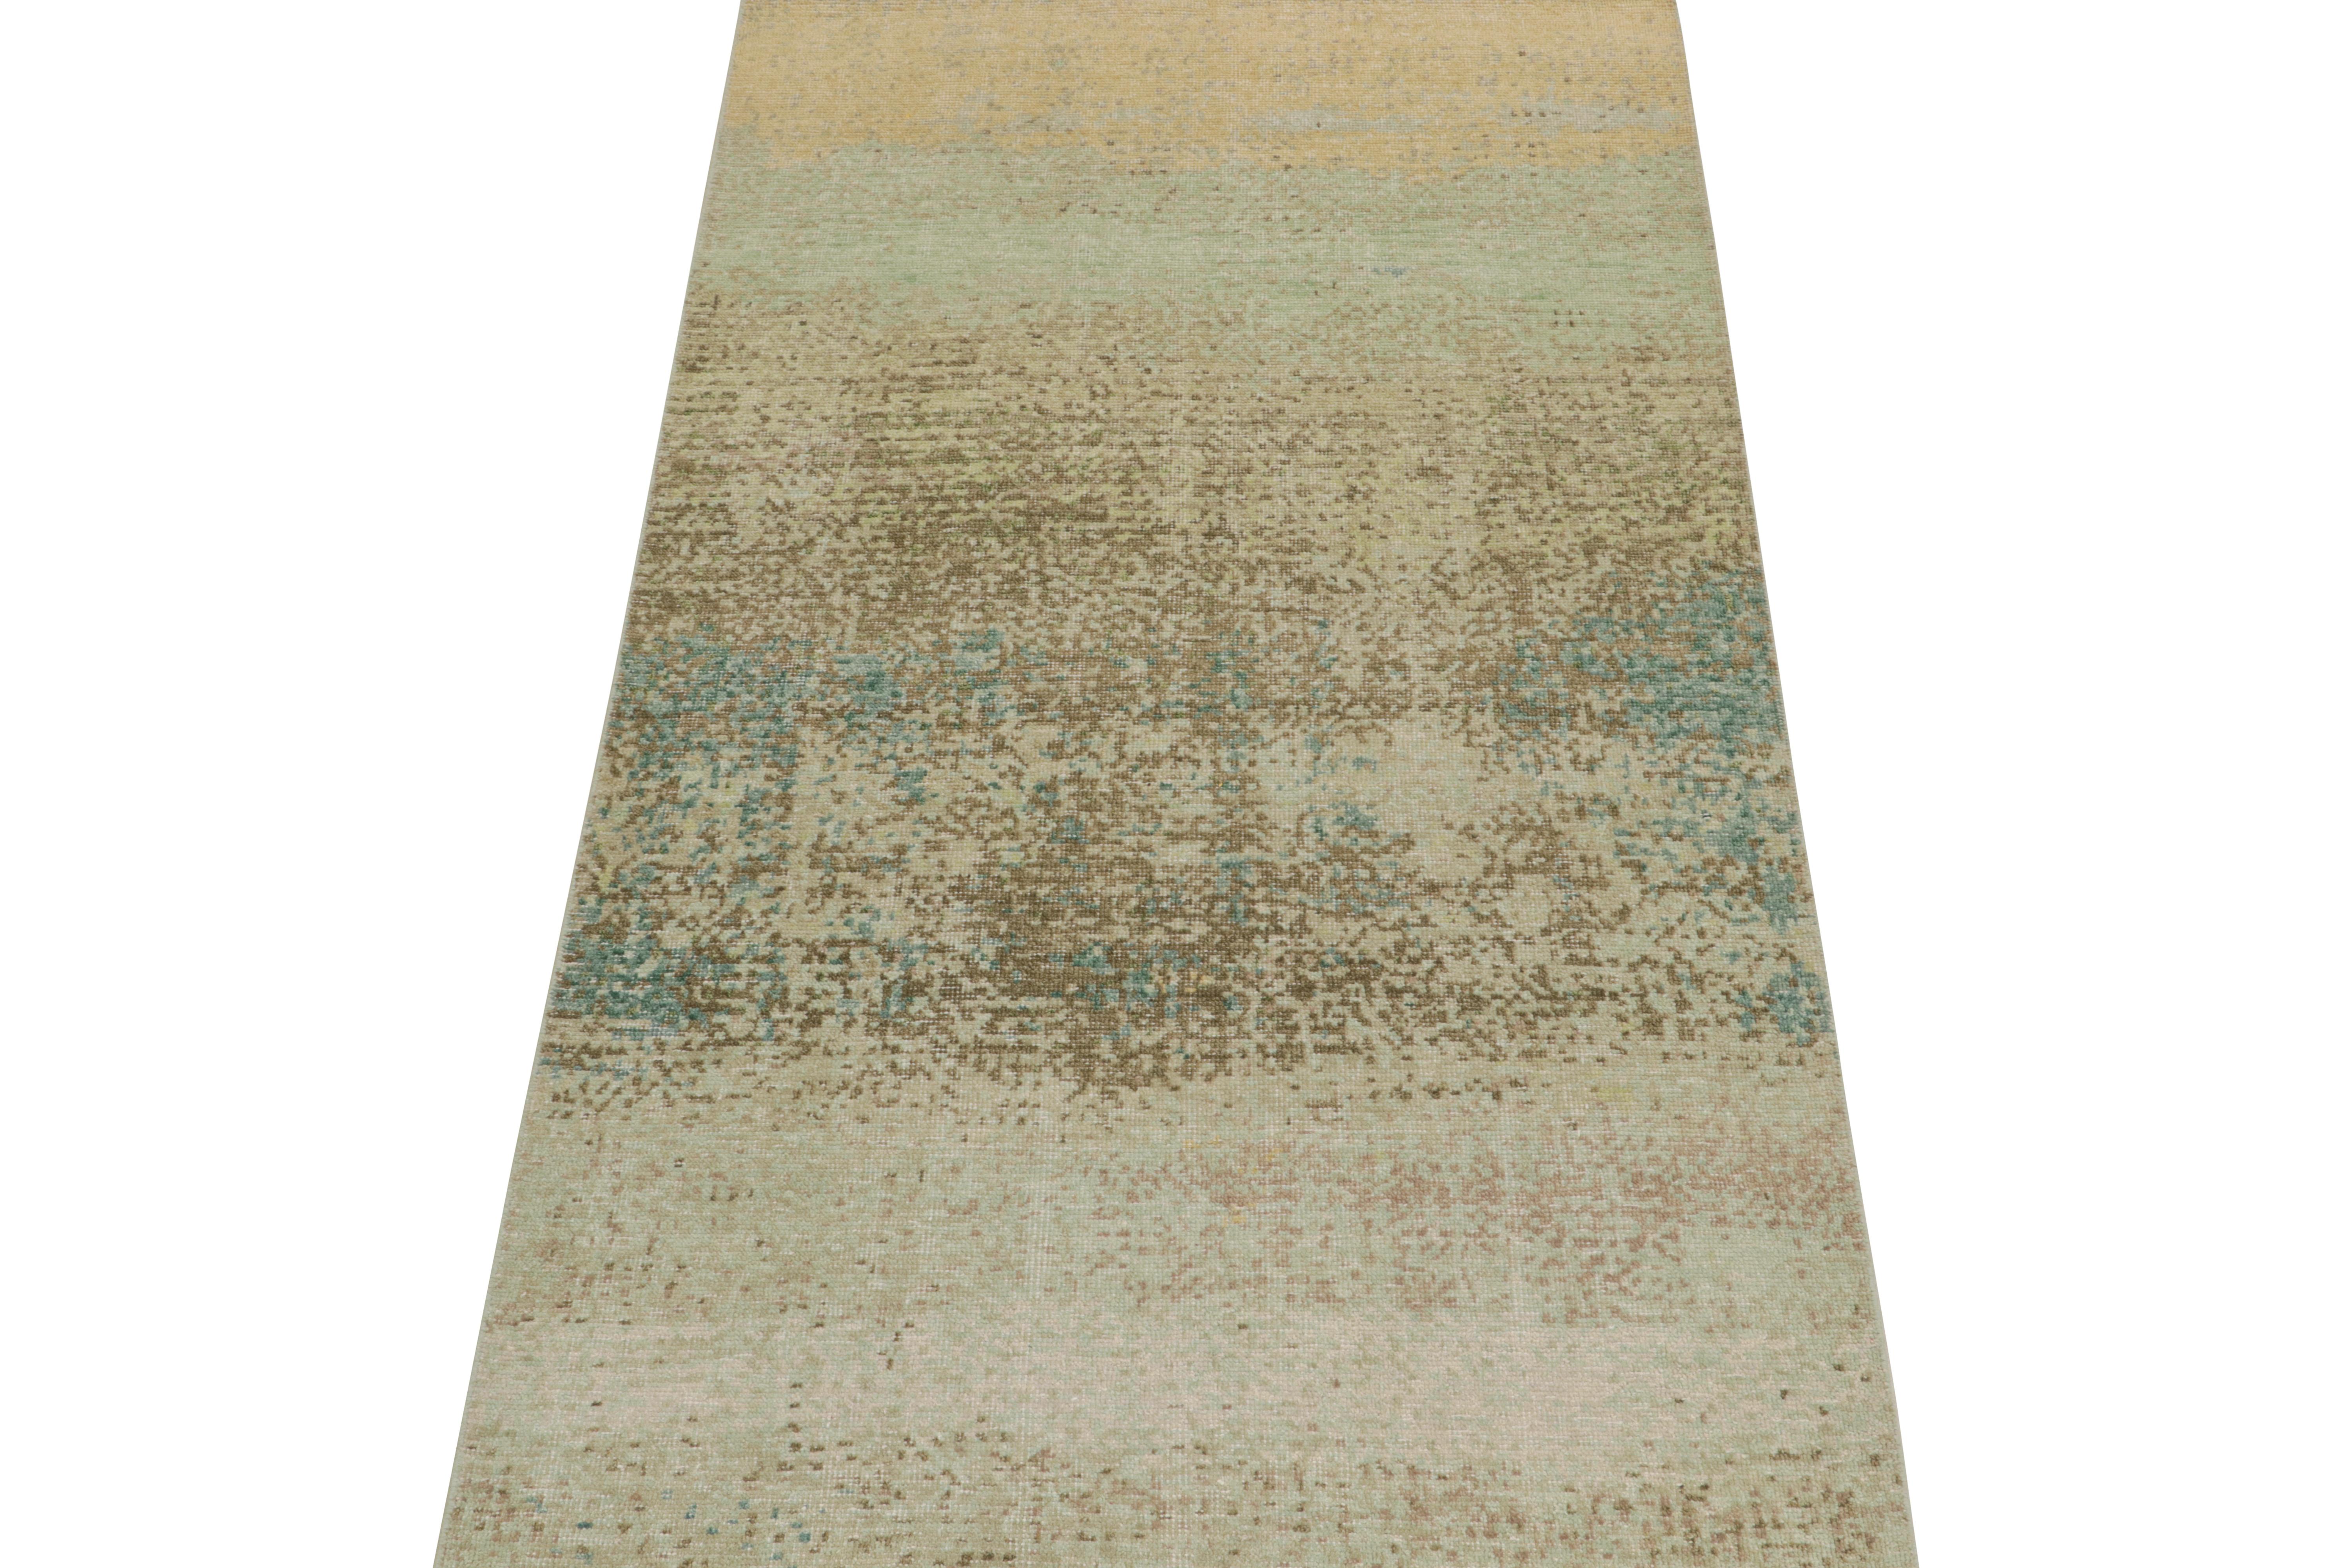 This contemporary 4x8 abstract rug is a new addition to the Homage Collection by Rug & Kilim.

Further On the Design:

Hand-knotted in wool and cotton, this design evokes a fluid play of blue, green, beige and gold layered patterns. Keen eyes might